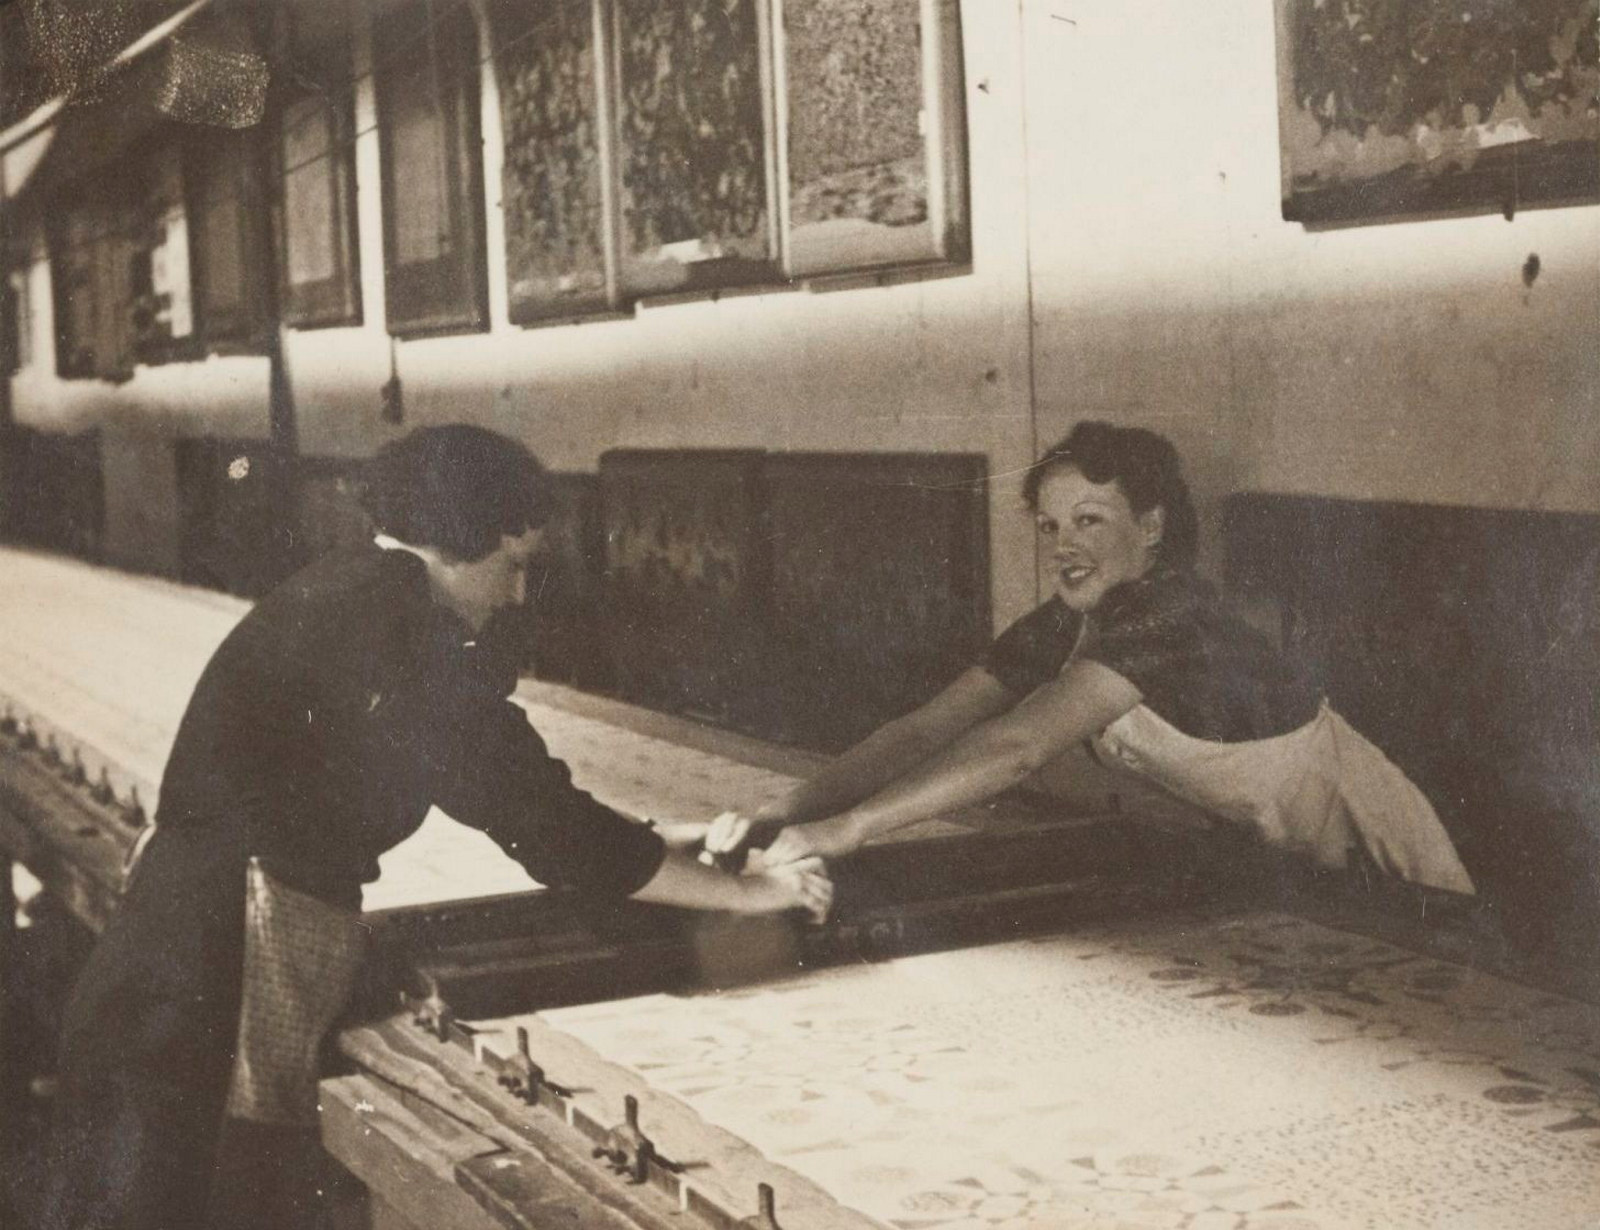 Girls printing: image from a photograph album ca. 1940 documenting Gilkes & Co's textile printing works at 61 Missenden Road, Camperdown, Sydney